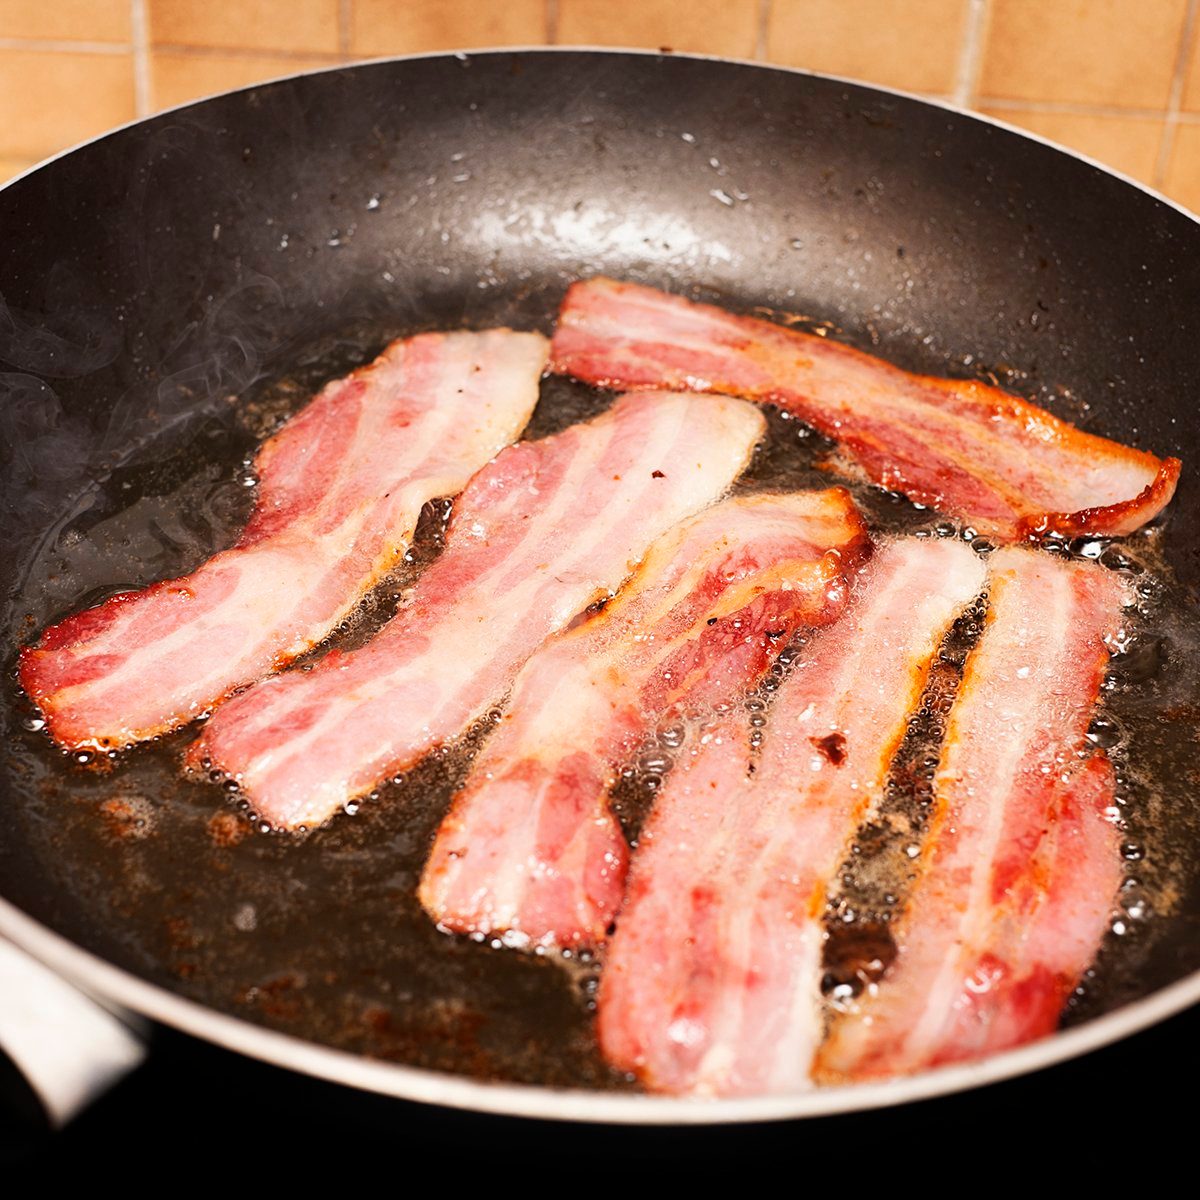 Appetizing frying pan full of sizzling rashers of bacon. Shot with Canon EOS 1Ds Mark III.